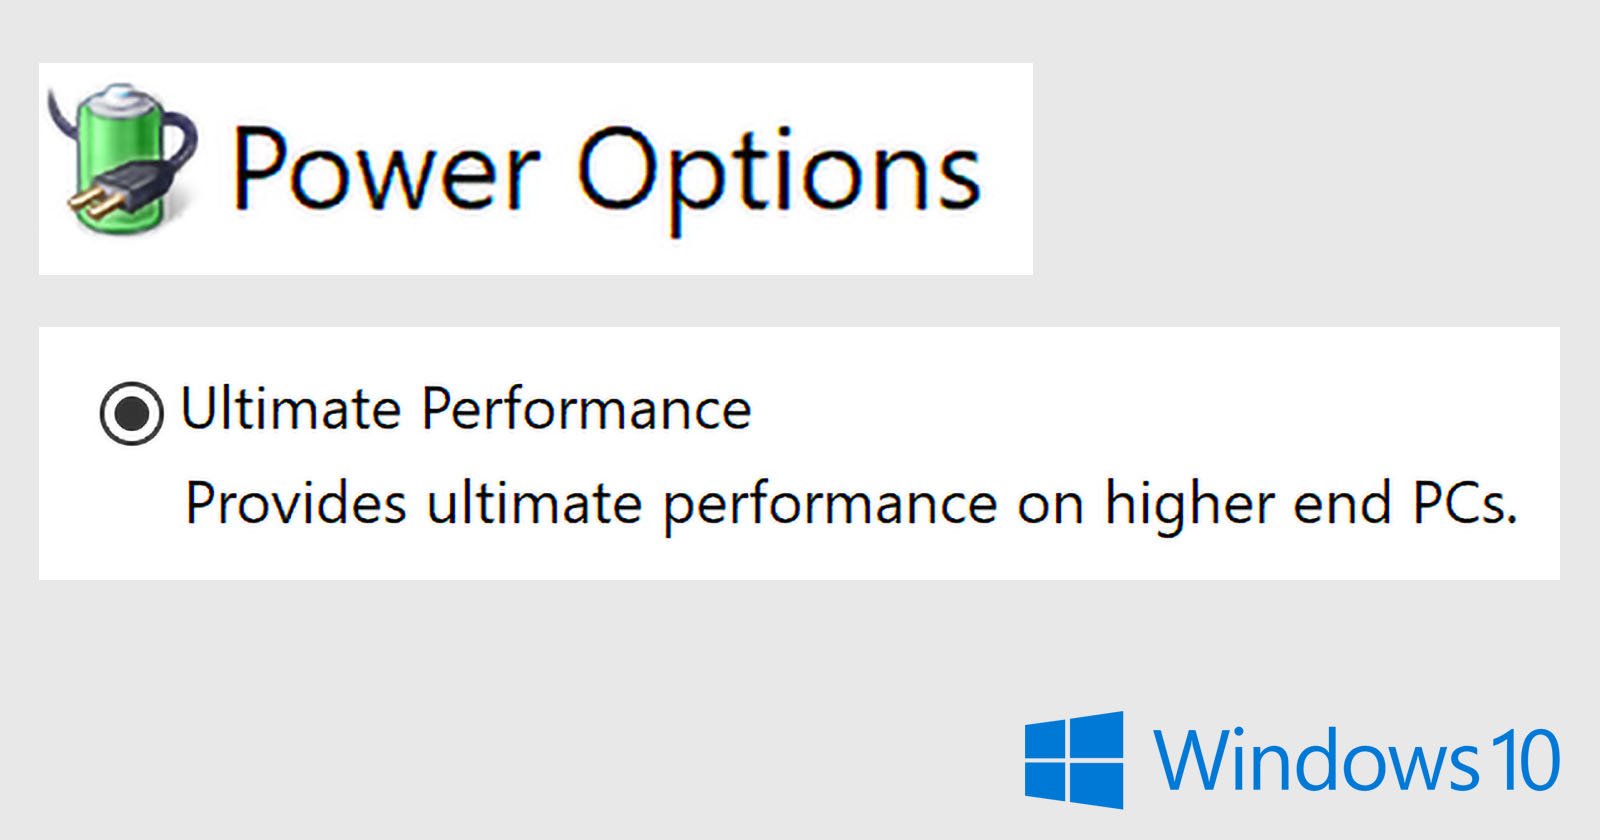 Windows 10 is Getting a New 'Ultimate Performance' Mode ...